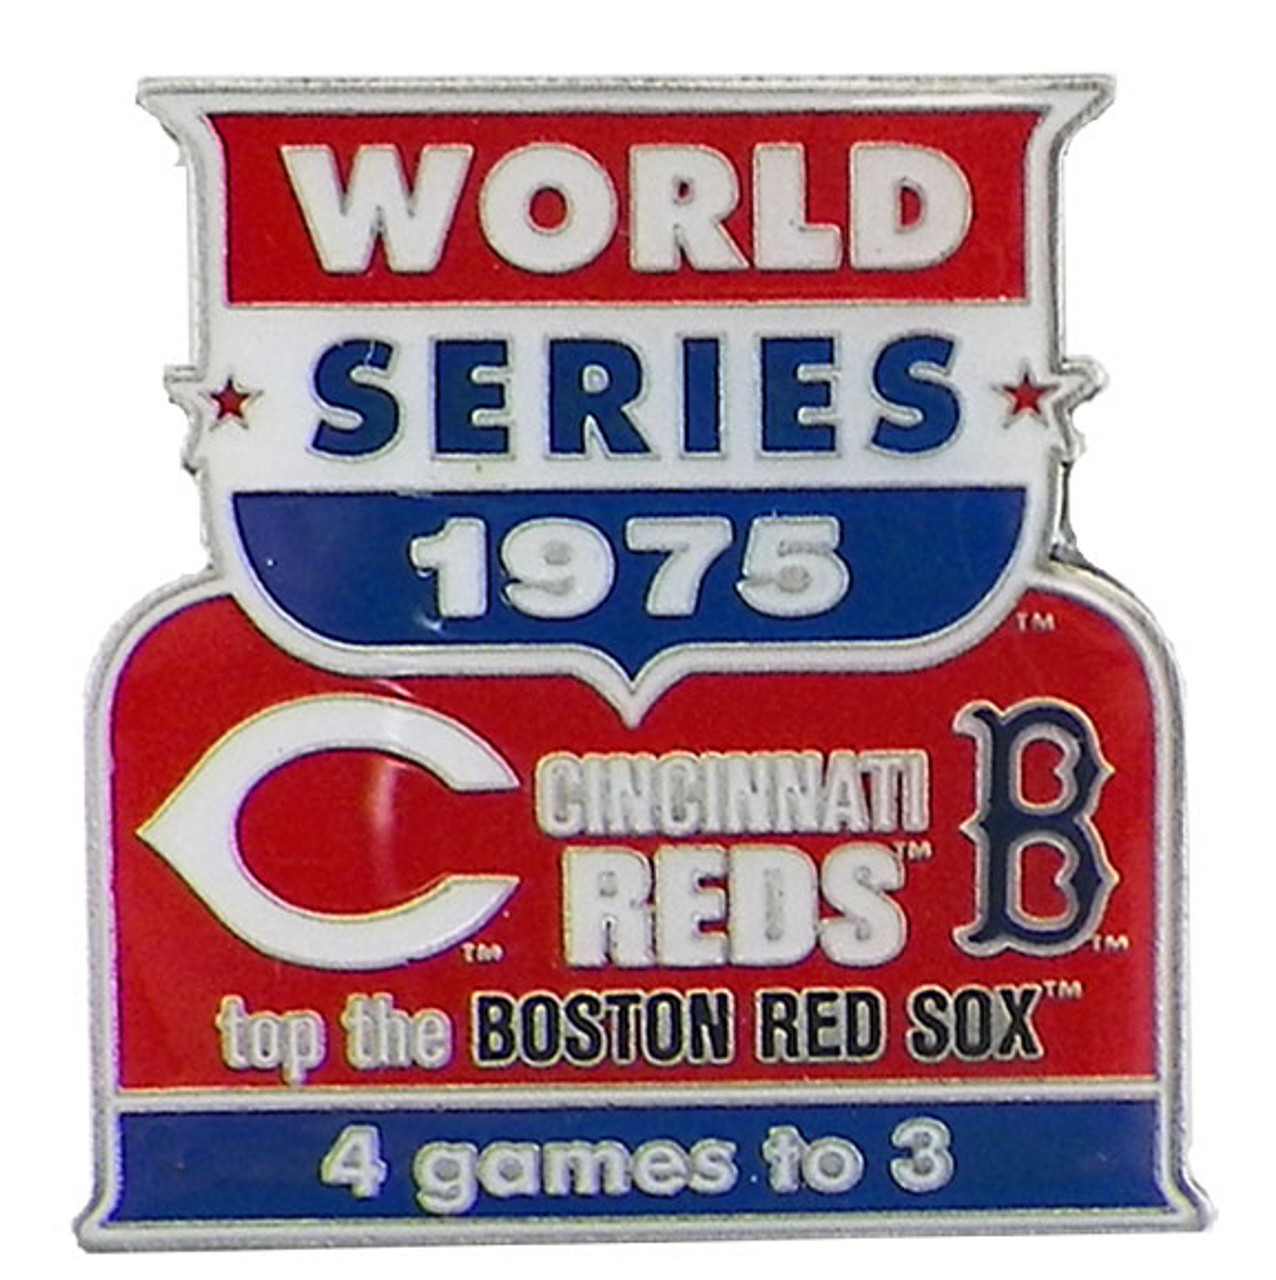 1975 World Series Commemorative Pin - Reds vs. Red Sox